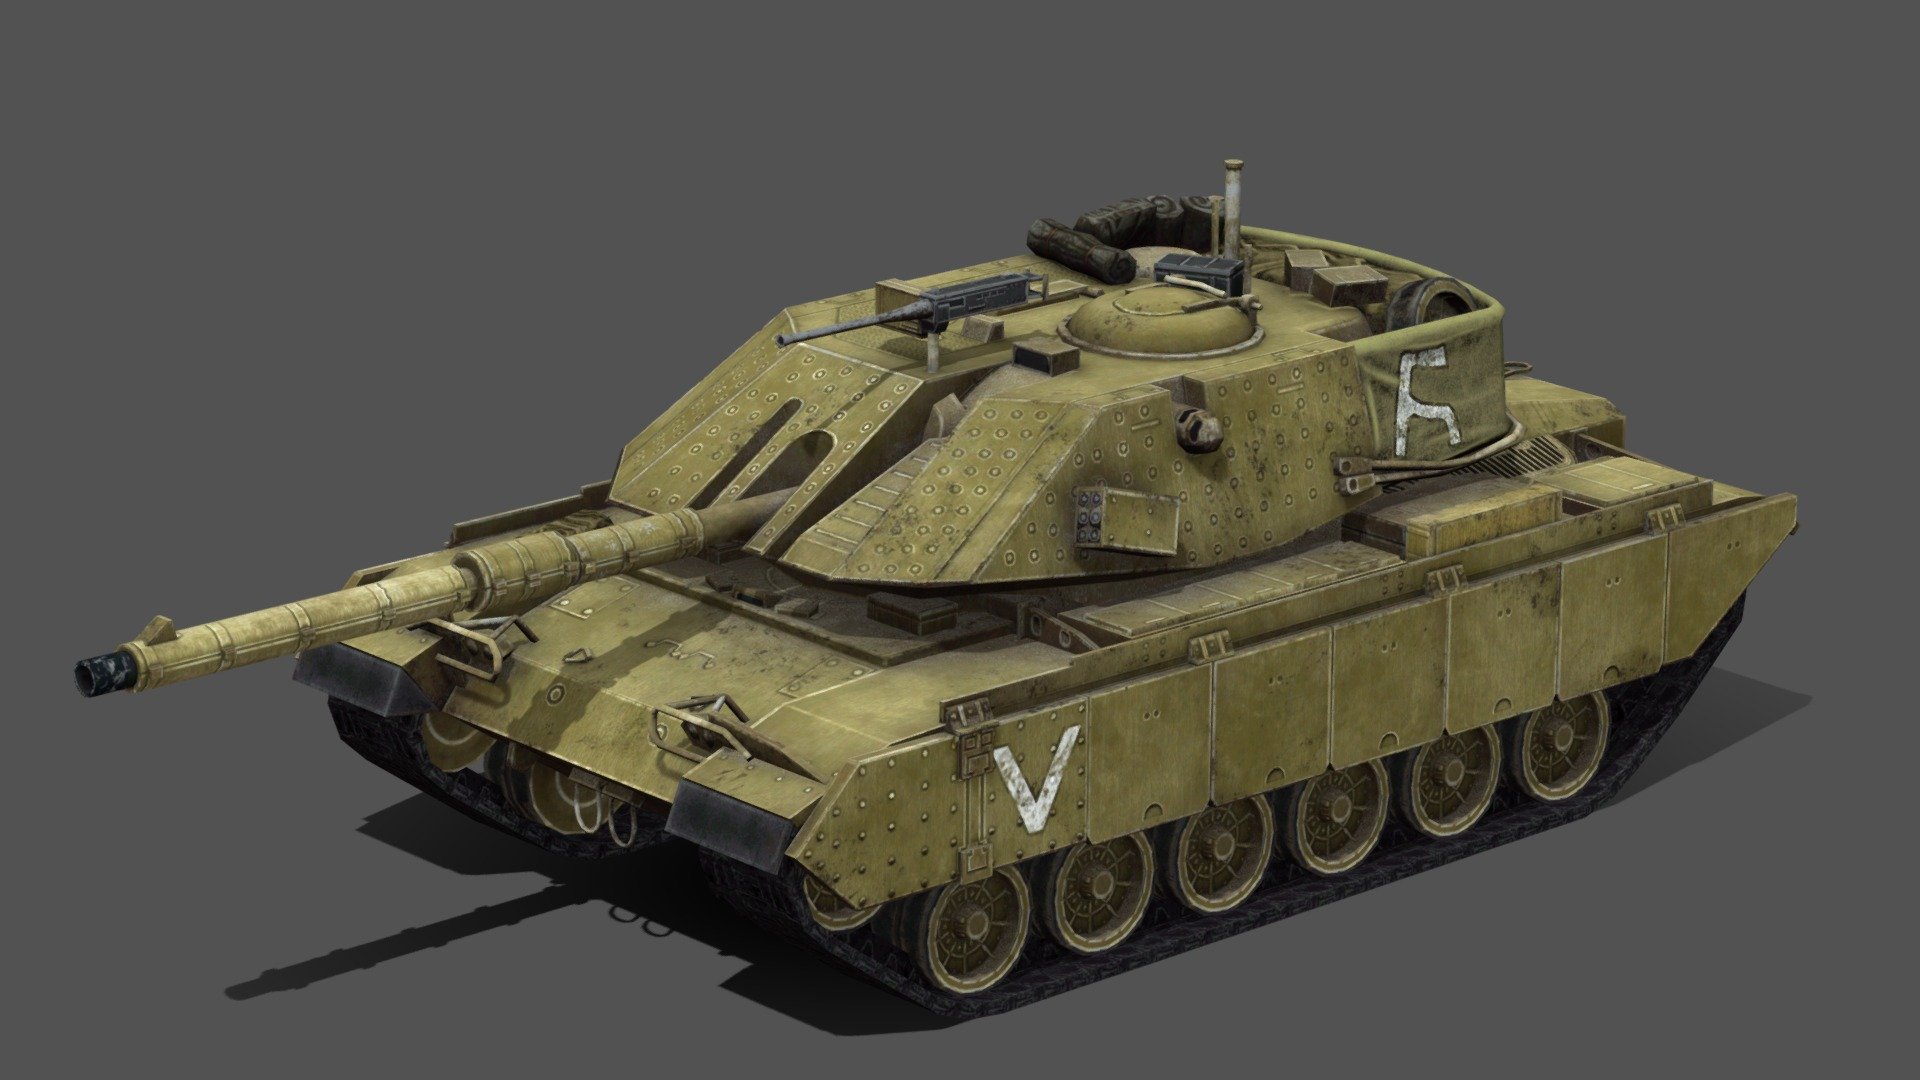 Magach 7C

Magach is the designation of a series of tanks in Israeli service. The tanks are based on the American M48 and M60 tanks. The name continued to be used for all M48/M60 tanks. Magach 1, 2, 3, and 5 are based on M48 series tanks, and Magach 6 and 7 are based on M60 series tanks 3d model